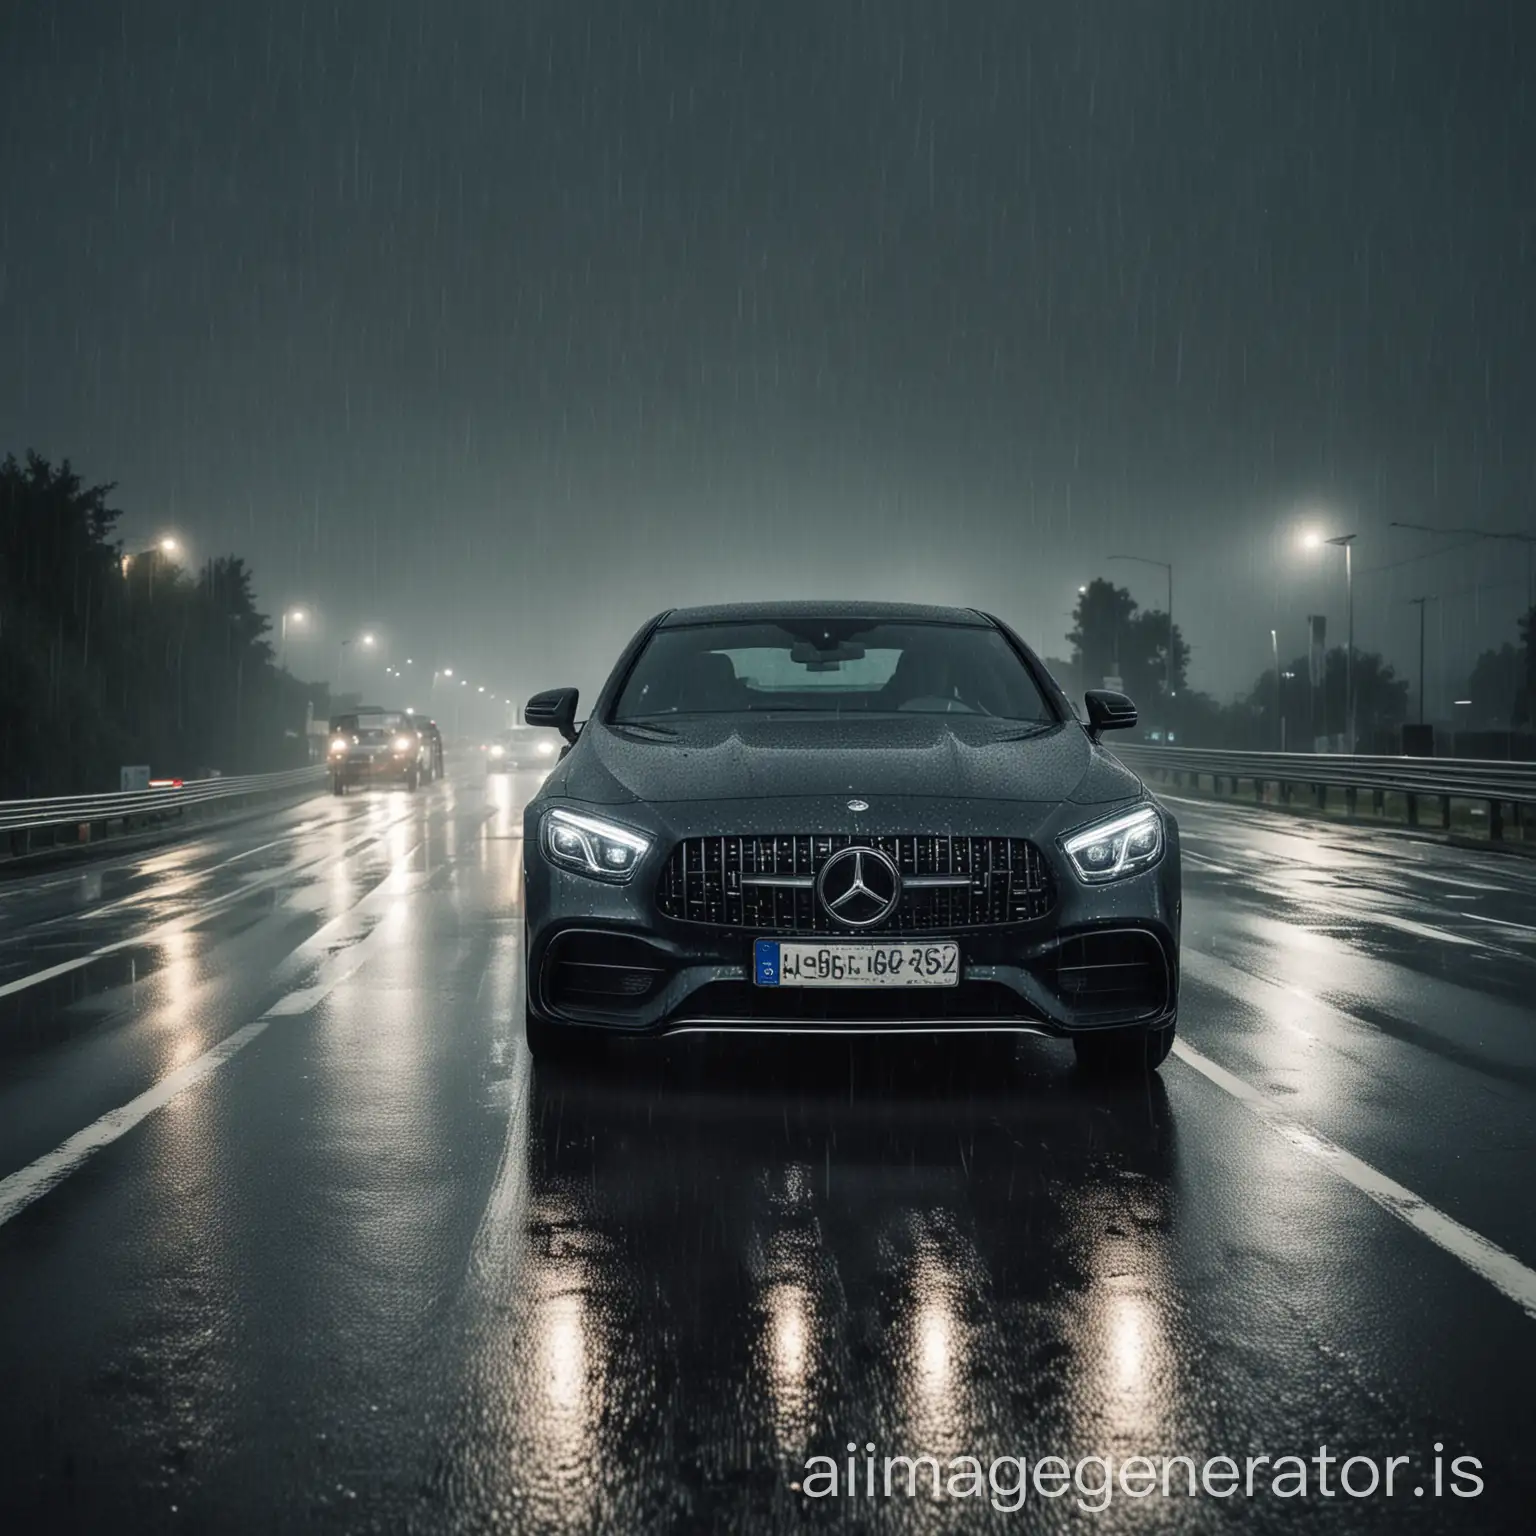 driving on the high-speed road in the rainy night's Mercedes-Benz car